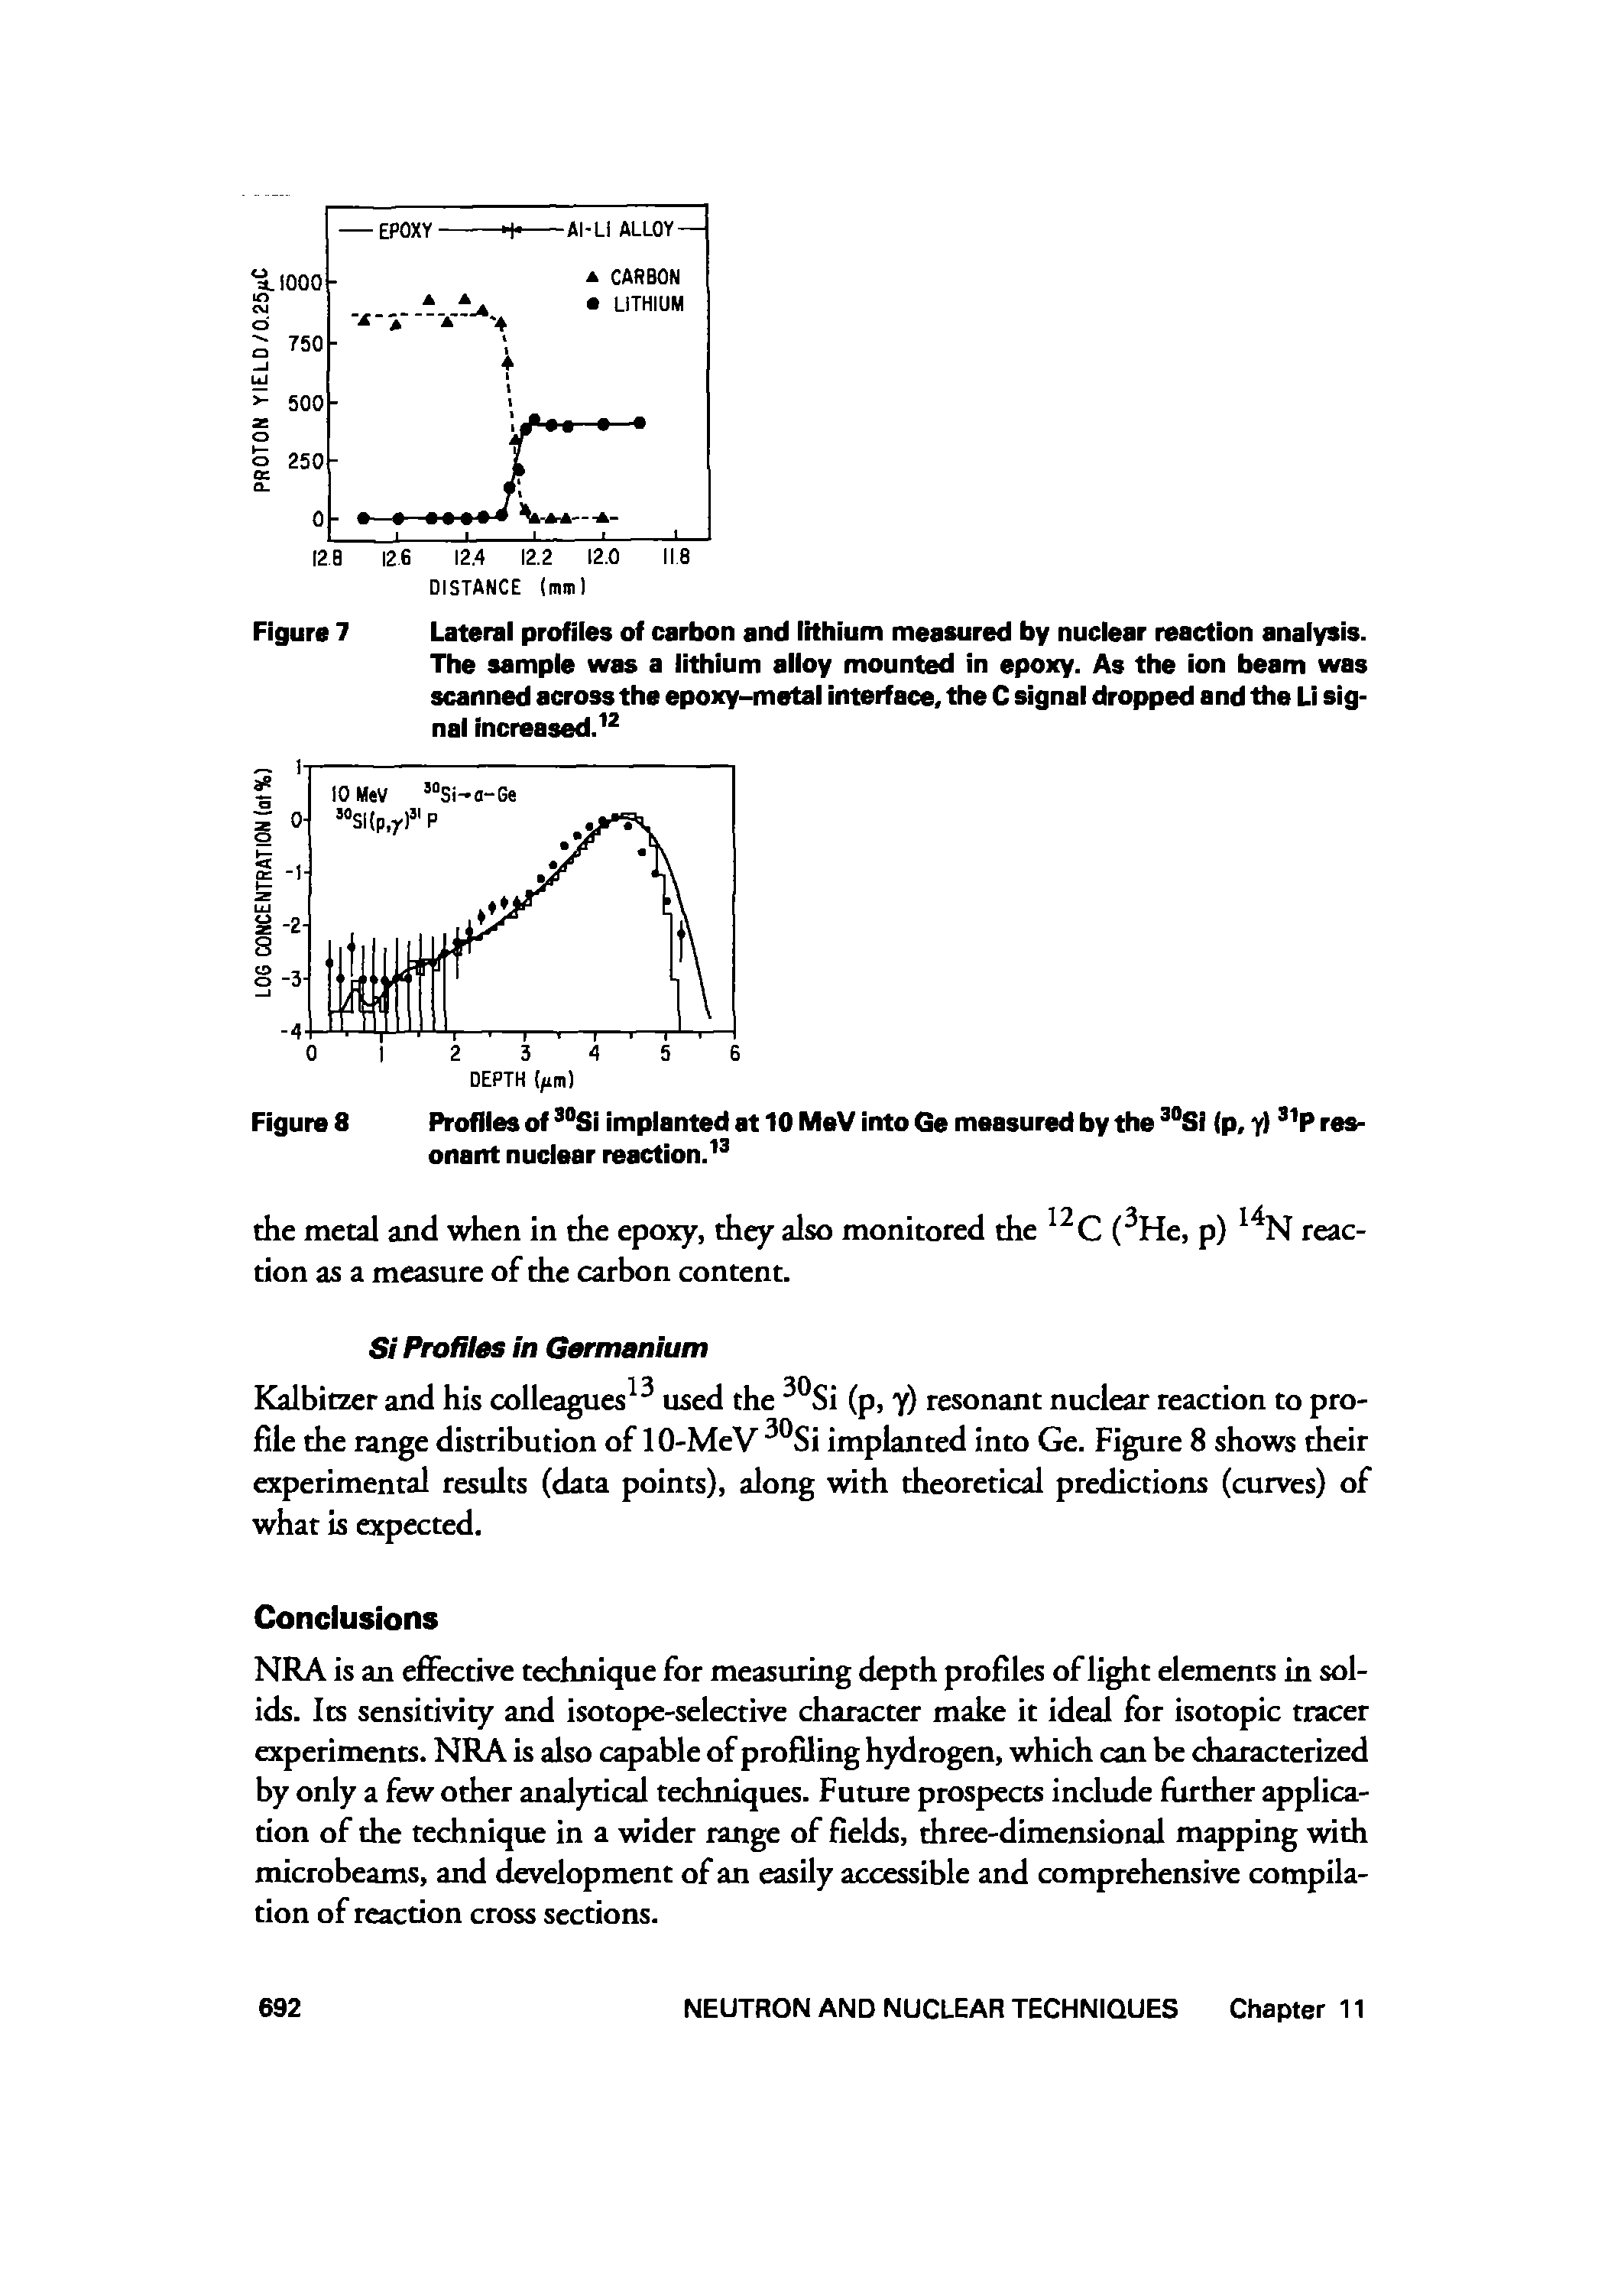 Figure 7 Lateral profiles of carbon and lithium measured by nuclear reaction analysis.